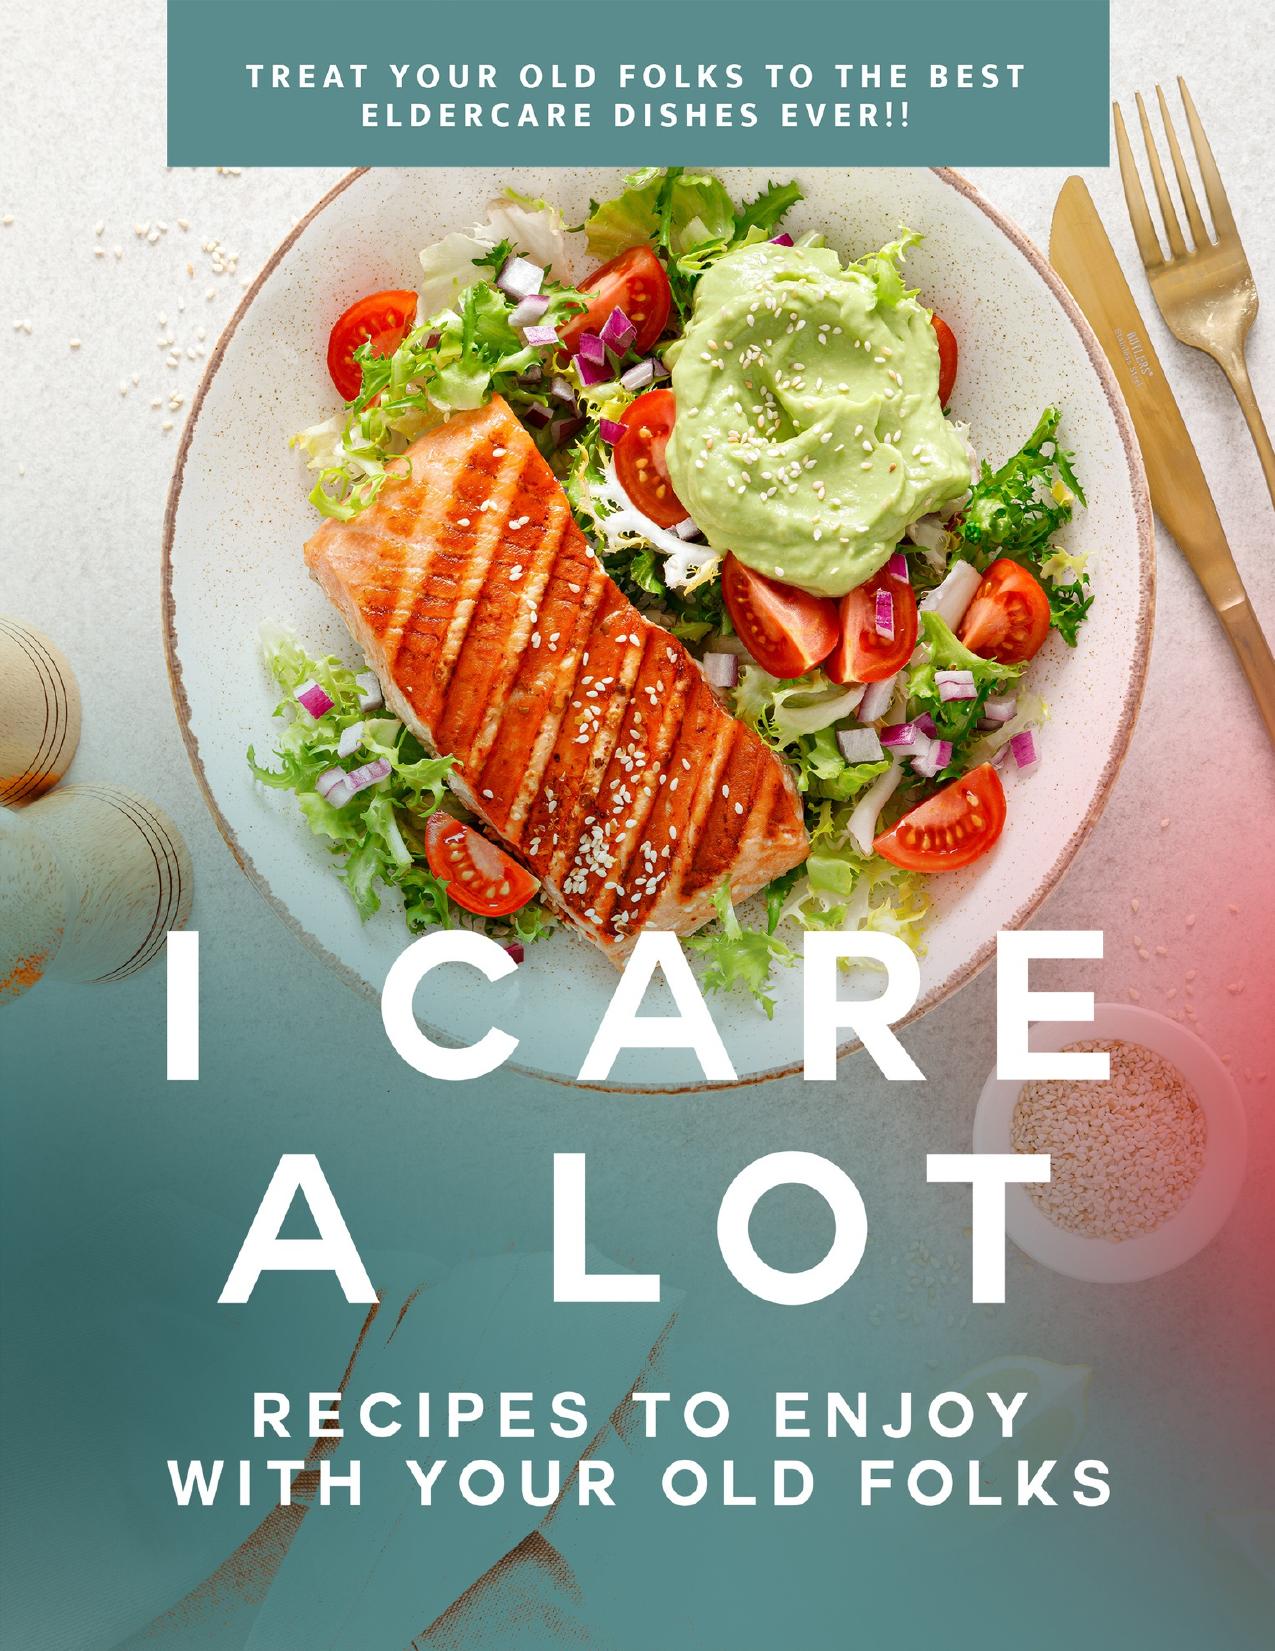 I Care a Lot: Recipes to Enjoy with Your Old Folks: Treat Your Old Folks to The Best Eldercare Dishes Ever!! by Babel Dan